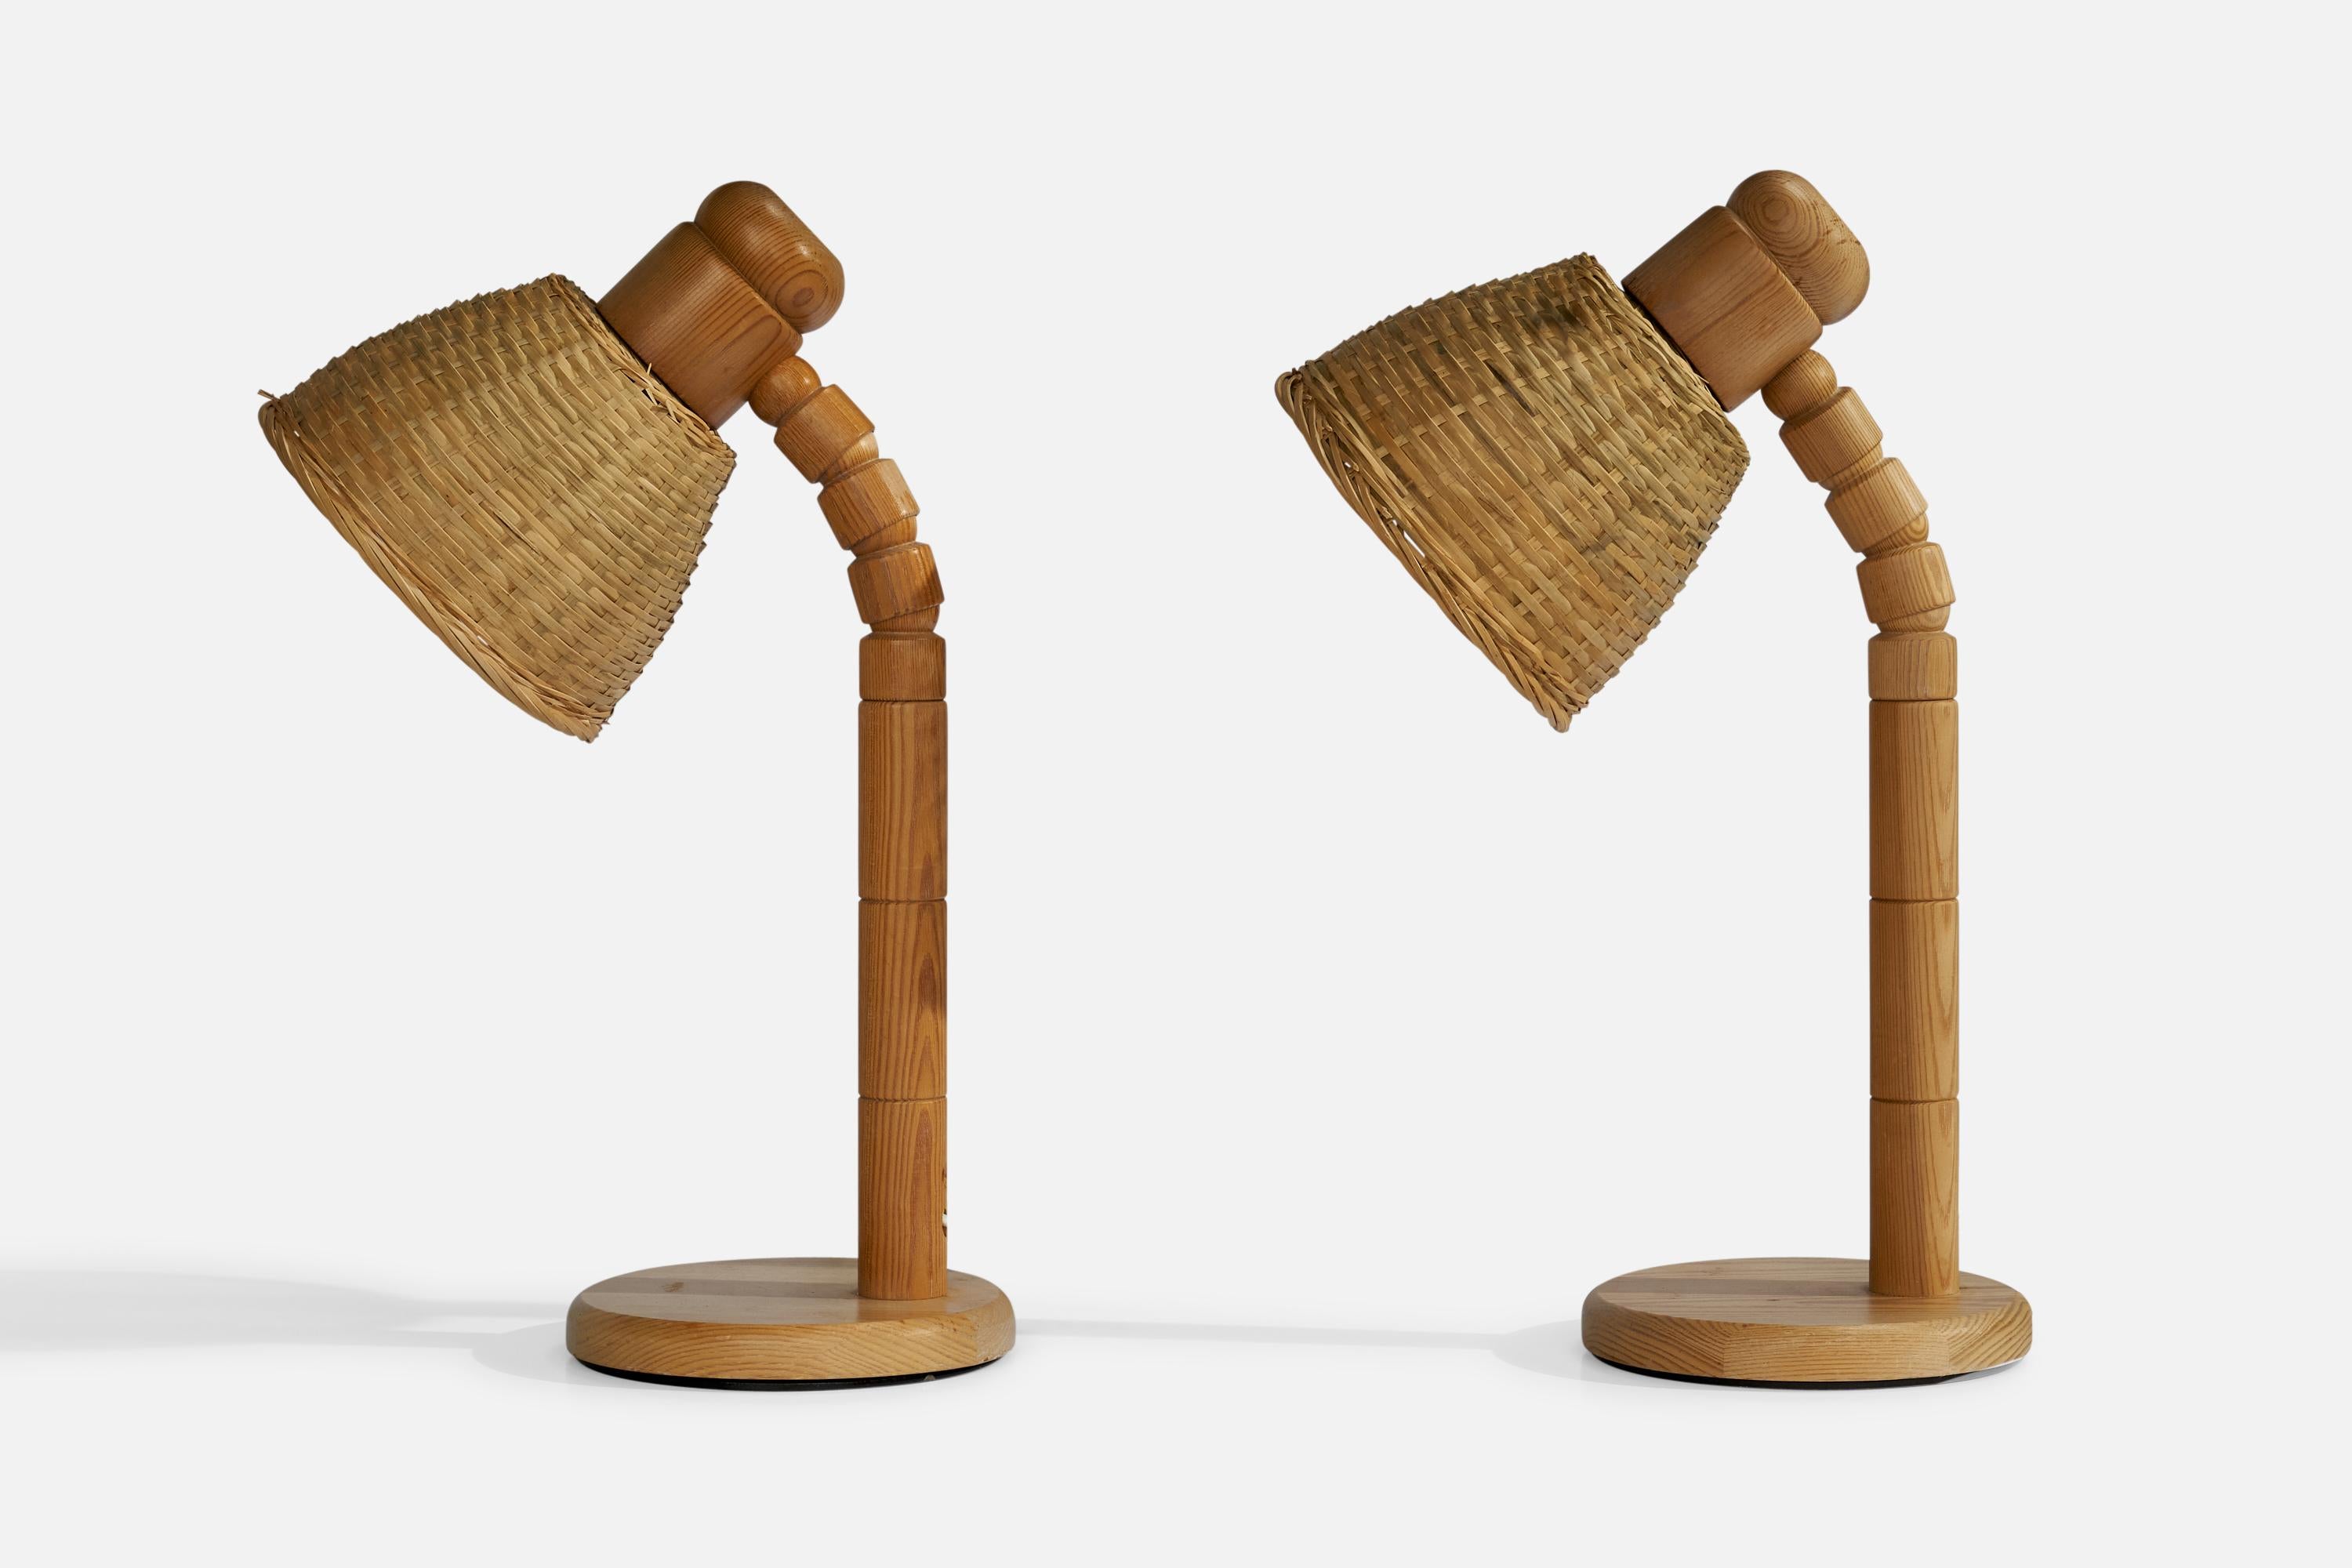 A pair of adjustable pine and rattan table lamps designed and produced in Sweden, 1970s.

Overall Dimensions (inches): 18” H x 7” W x 11.5” D
Stated dimensions include shade.
Bulb Specifications: E-26 Bulb
Number of Sockets: 2
All lighting will be